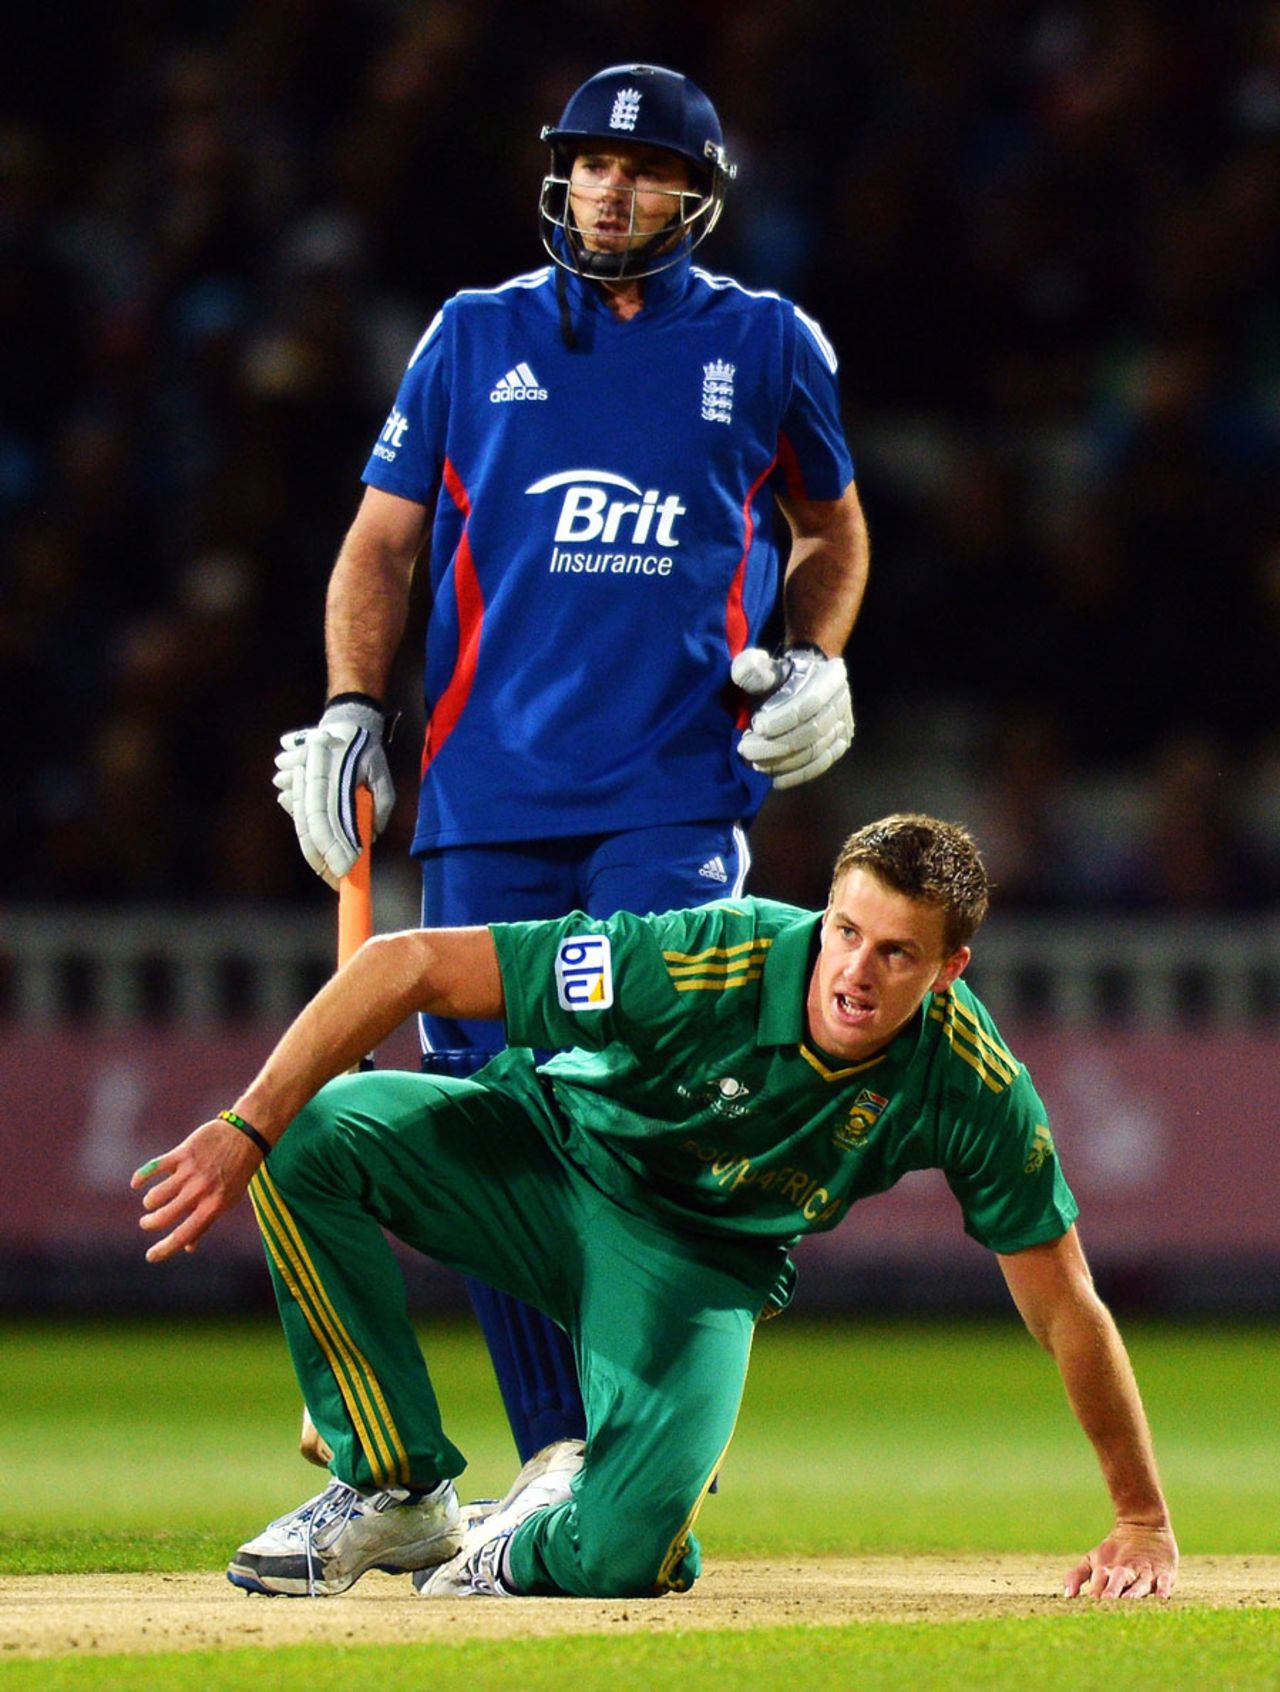 Morne Morkel had problems with his line in the opening over, England v South Africa, 3rd T20 international, Edgbaston, September 12, 2012